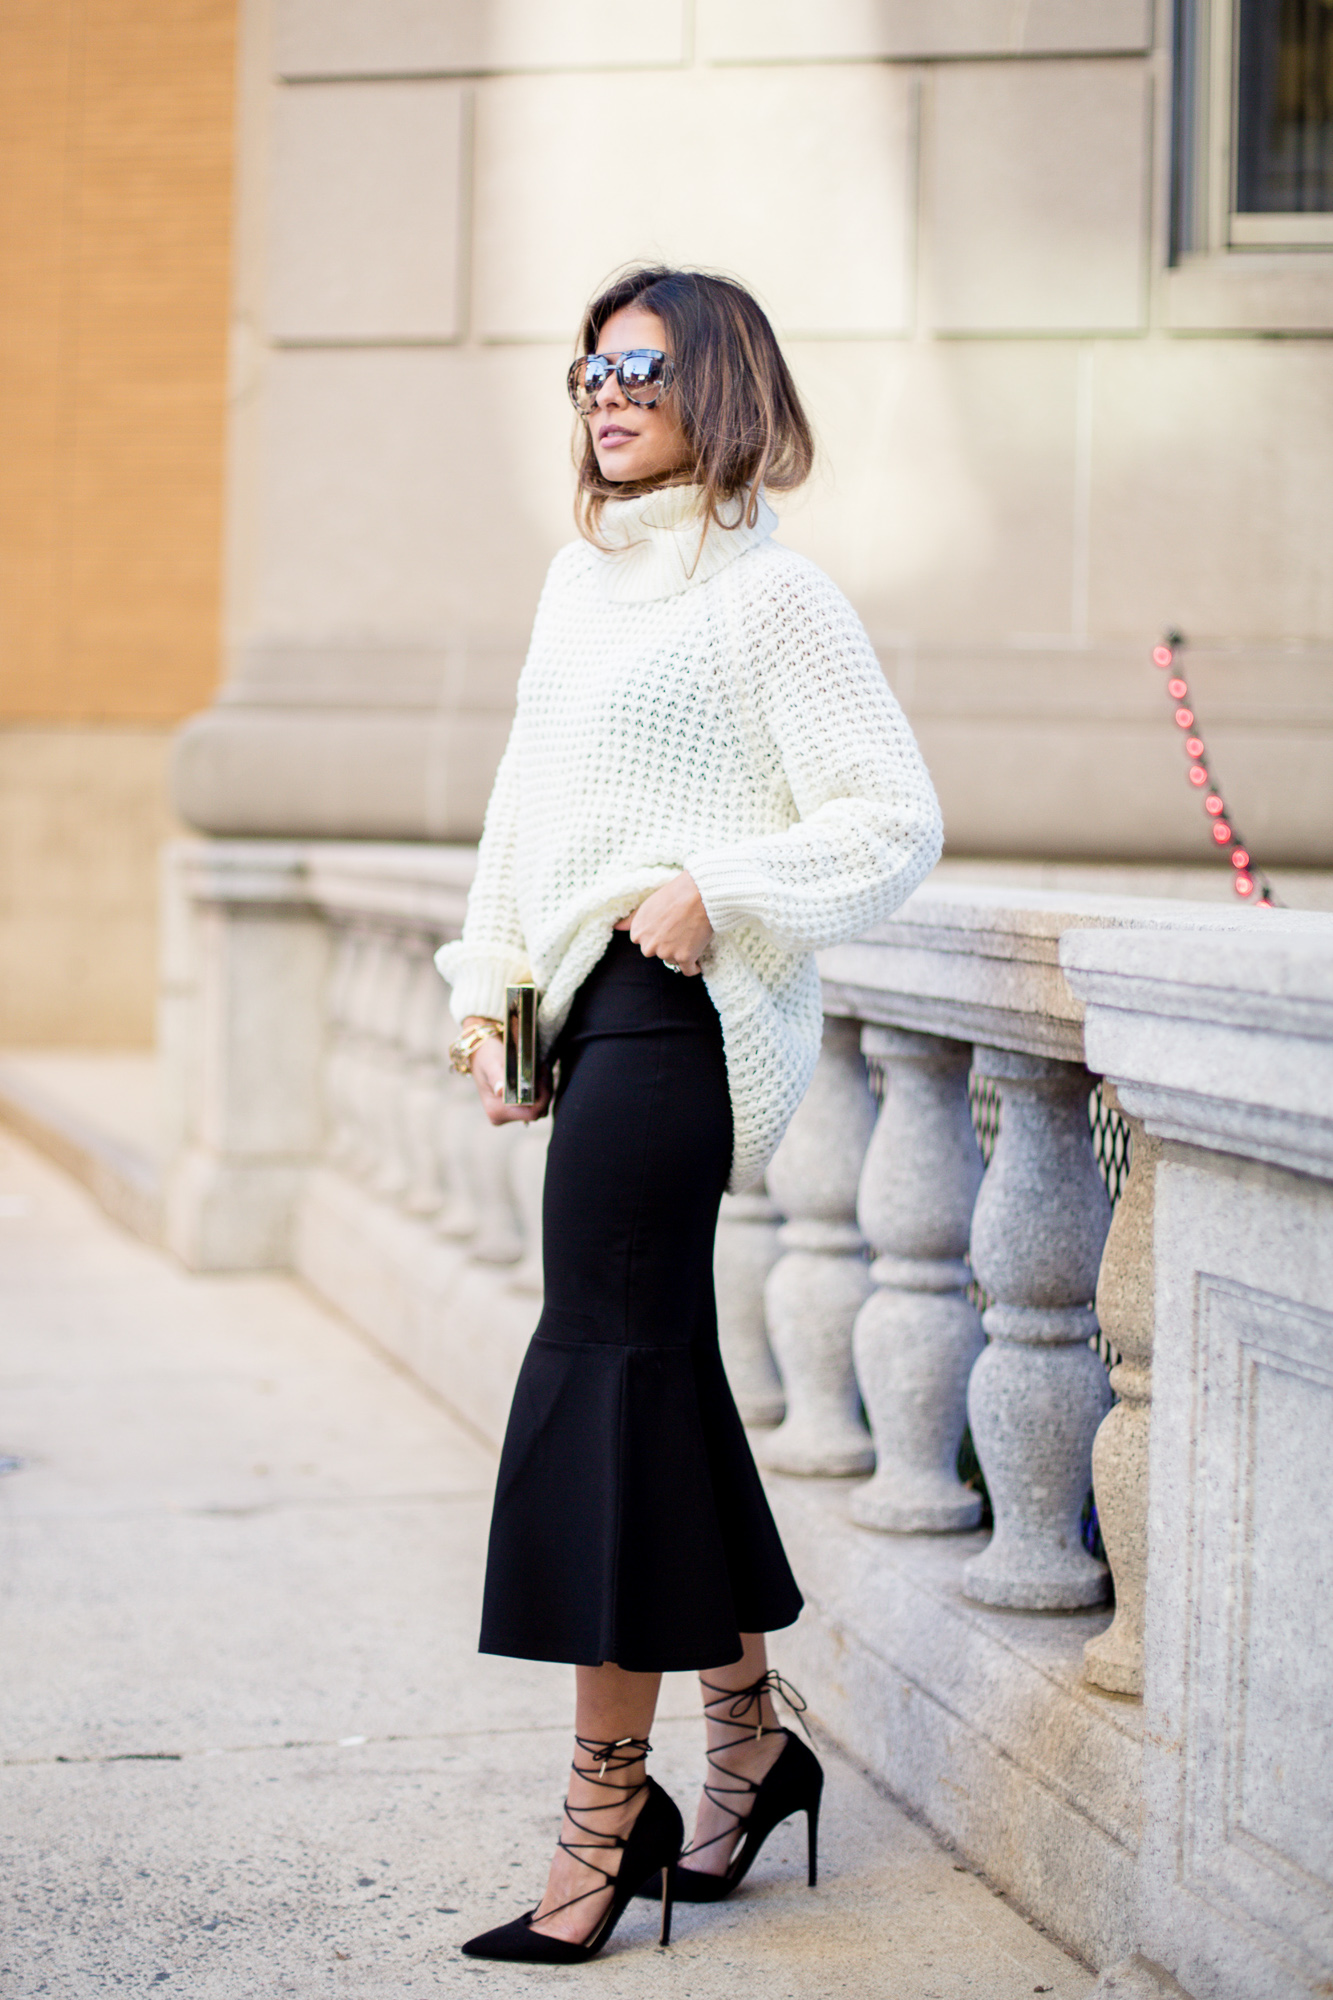 How To Wear Your White Turtleneck In The Right Way - fashionsy.com